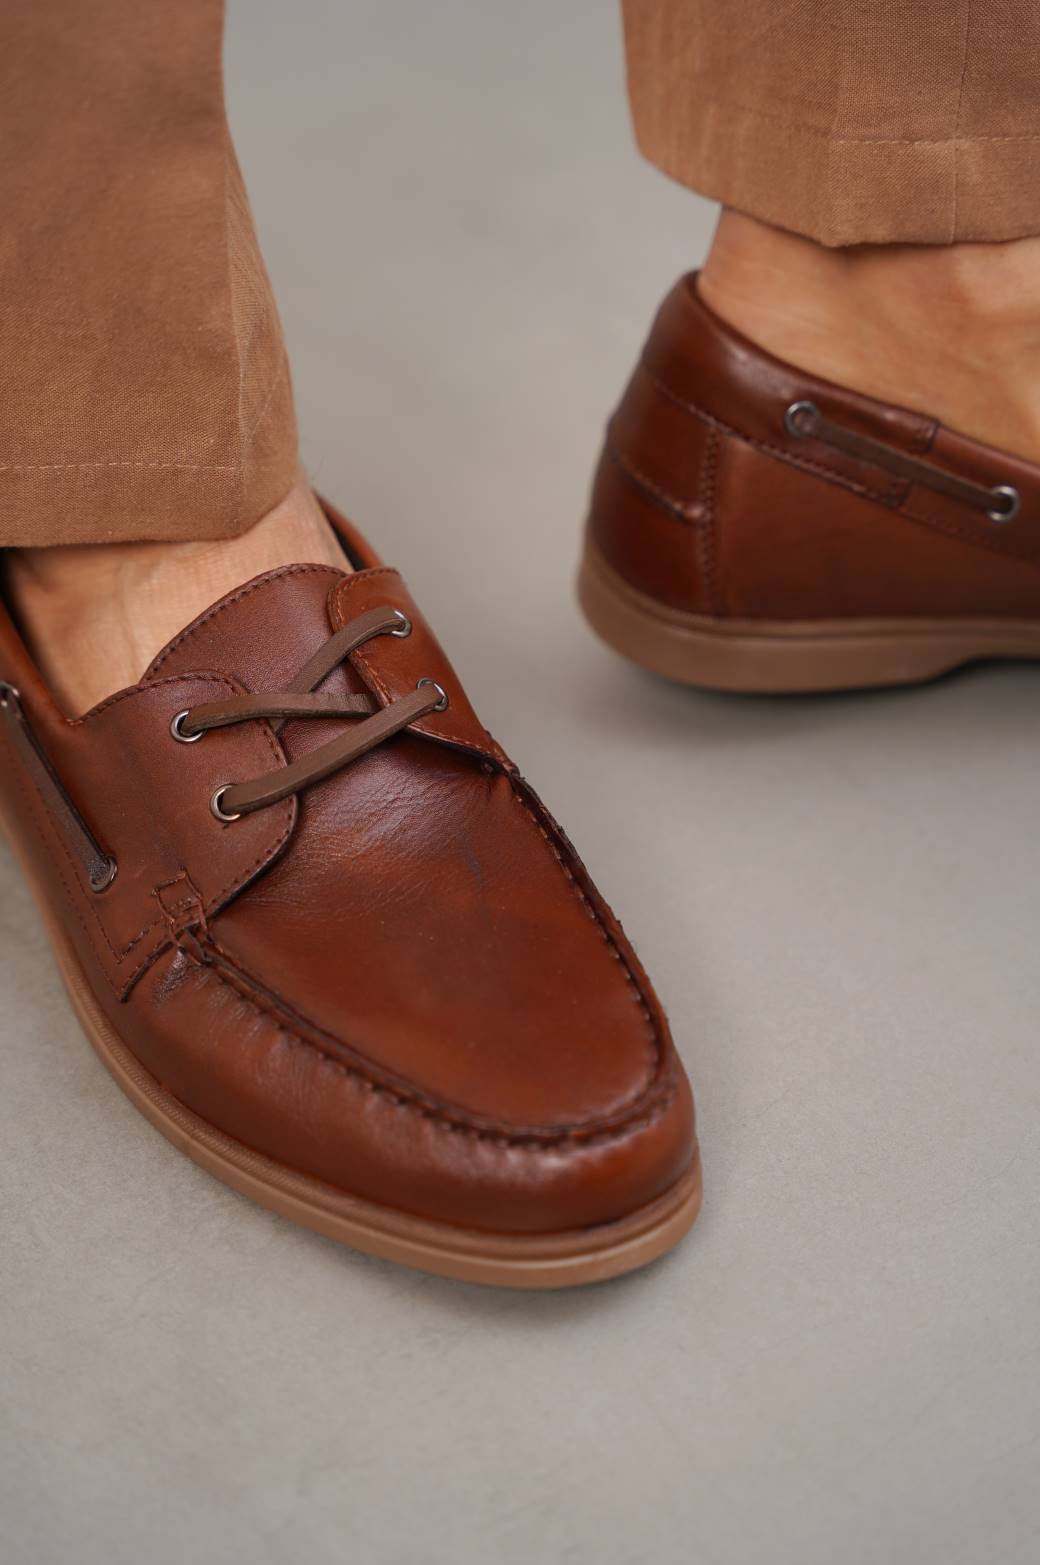 DARK BROWN LEATHER BOAT SHOES